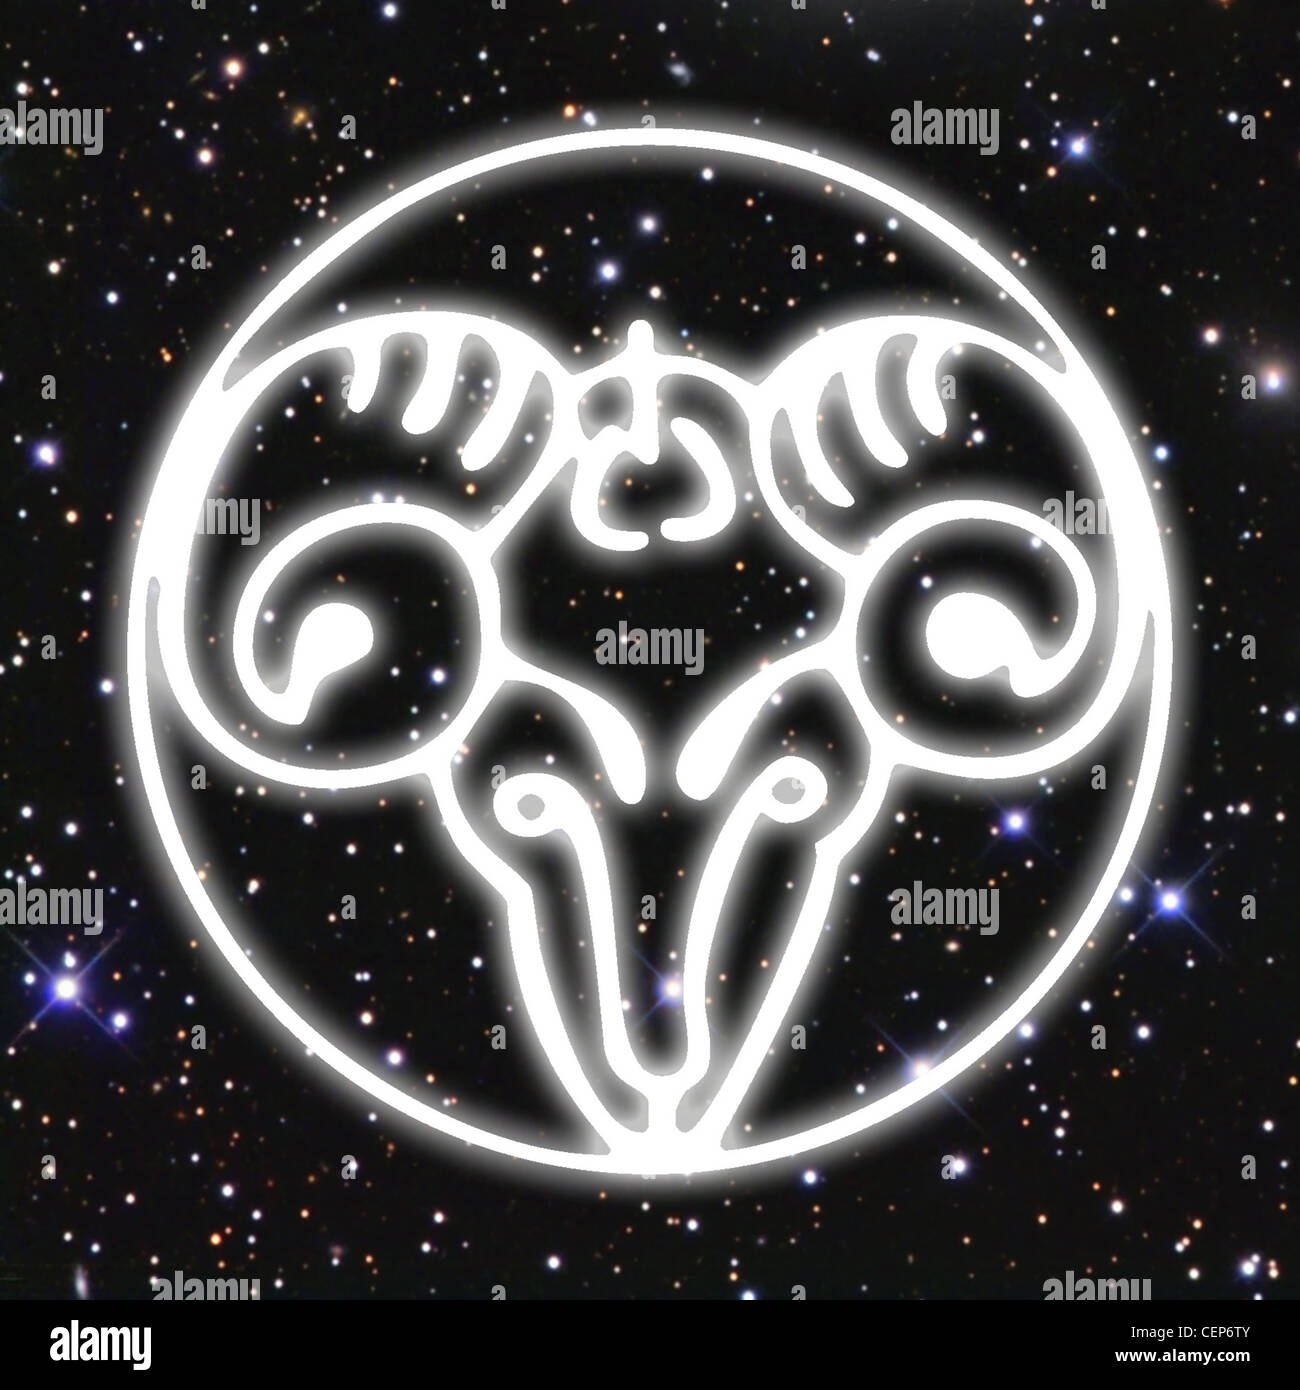 An illustration of the head of a white ram in a circle, set against a background of space filled with stars Stock Photo